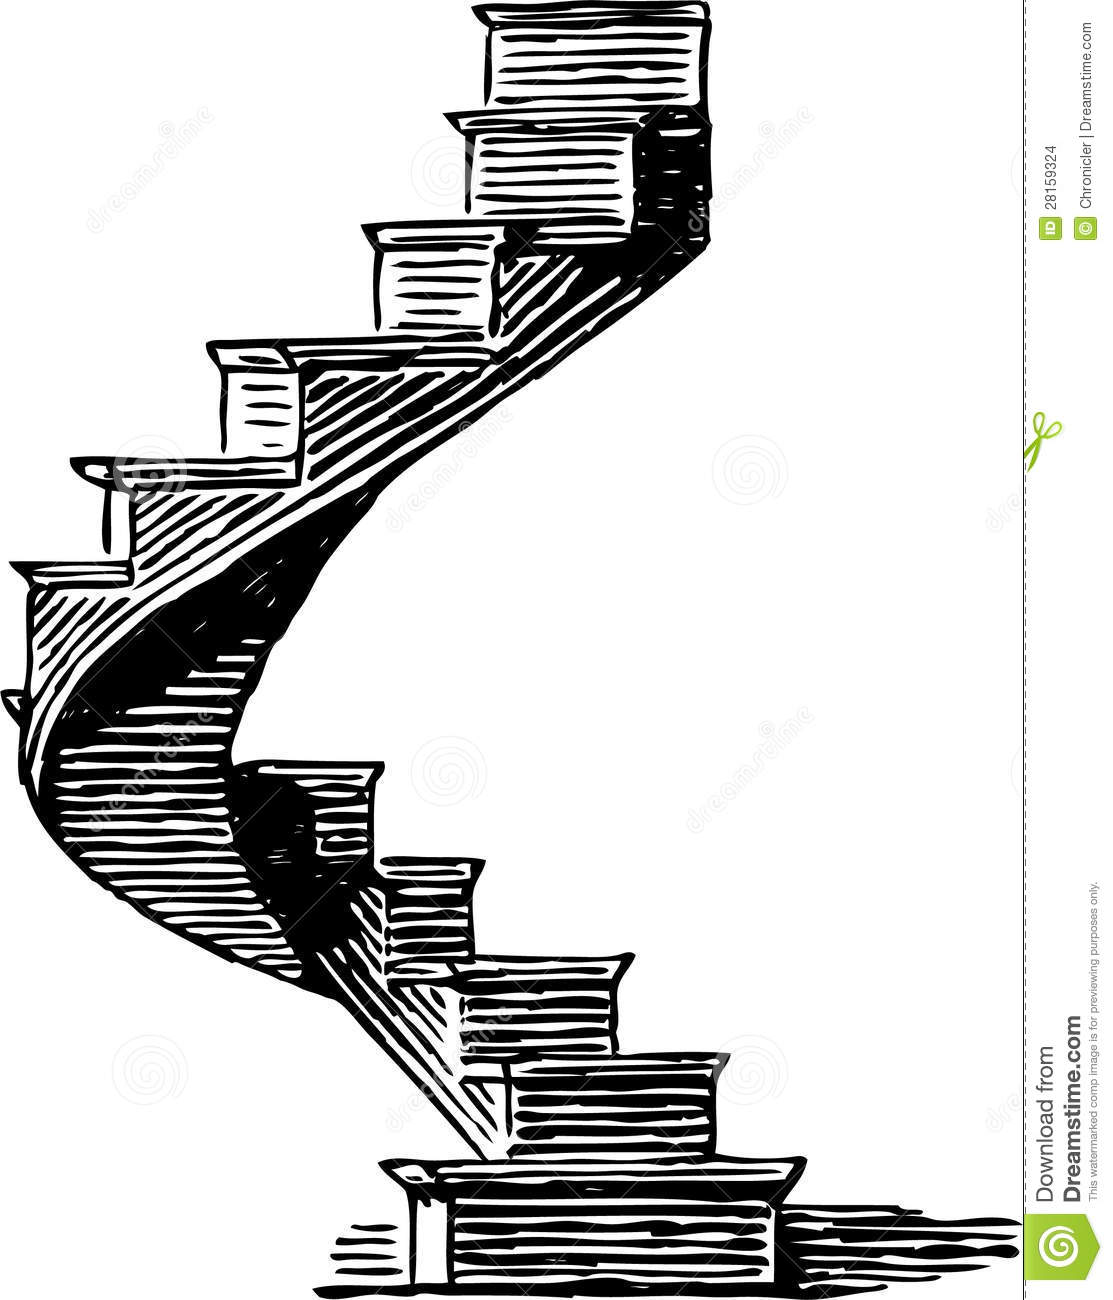 Spiral Staircase Stock Images   Image  28159324